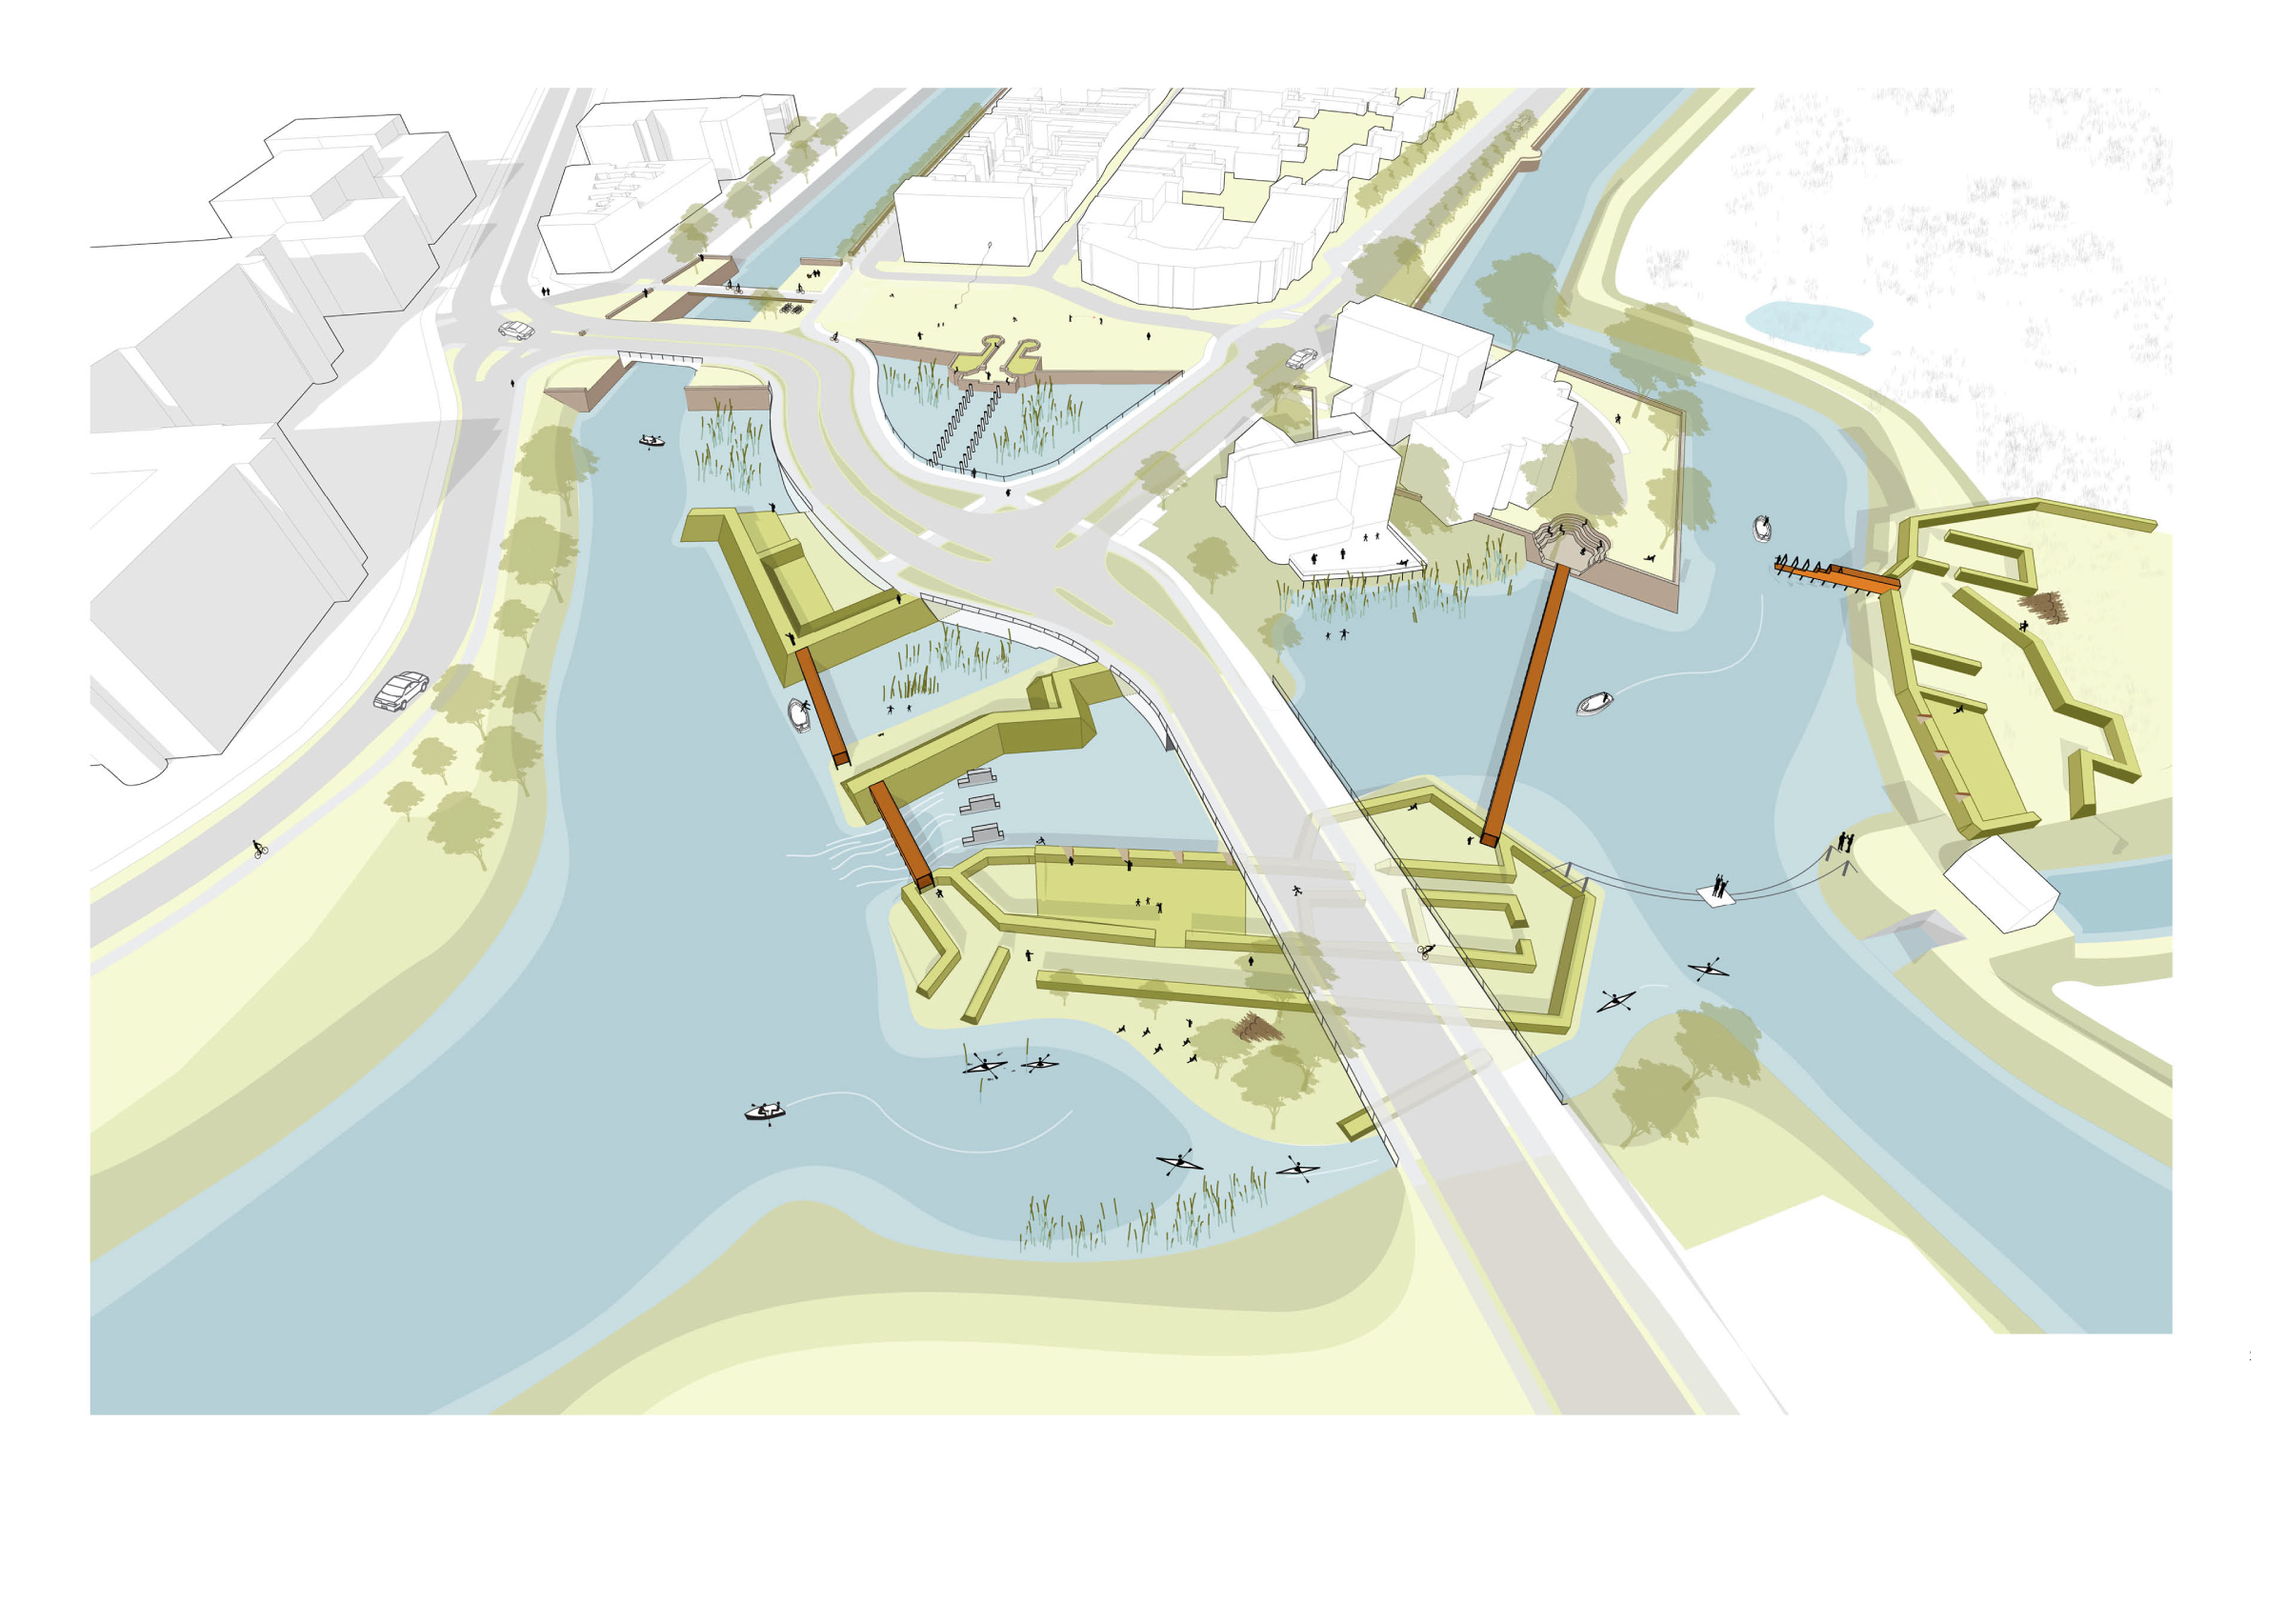 Design proposal, a junction of history, nature, recreation and traffic